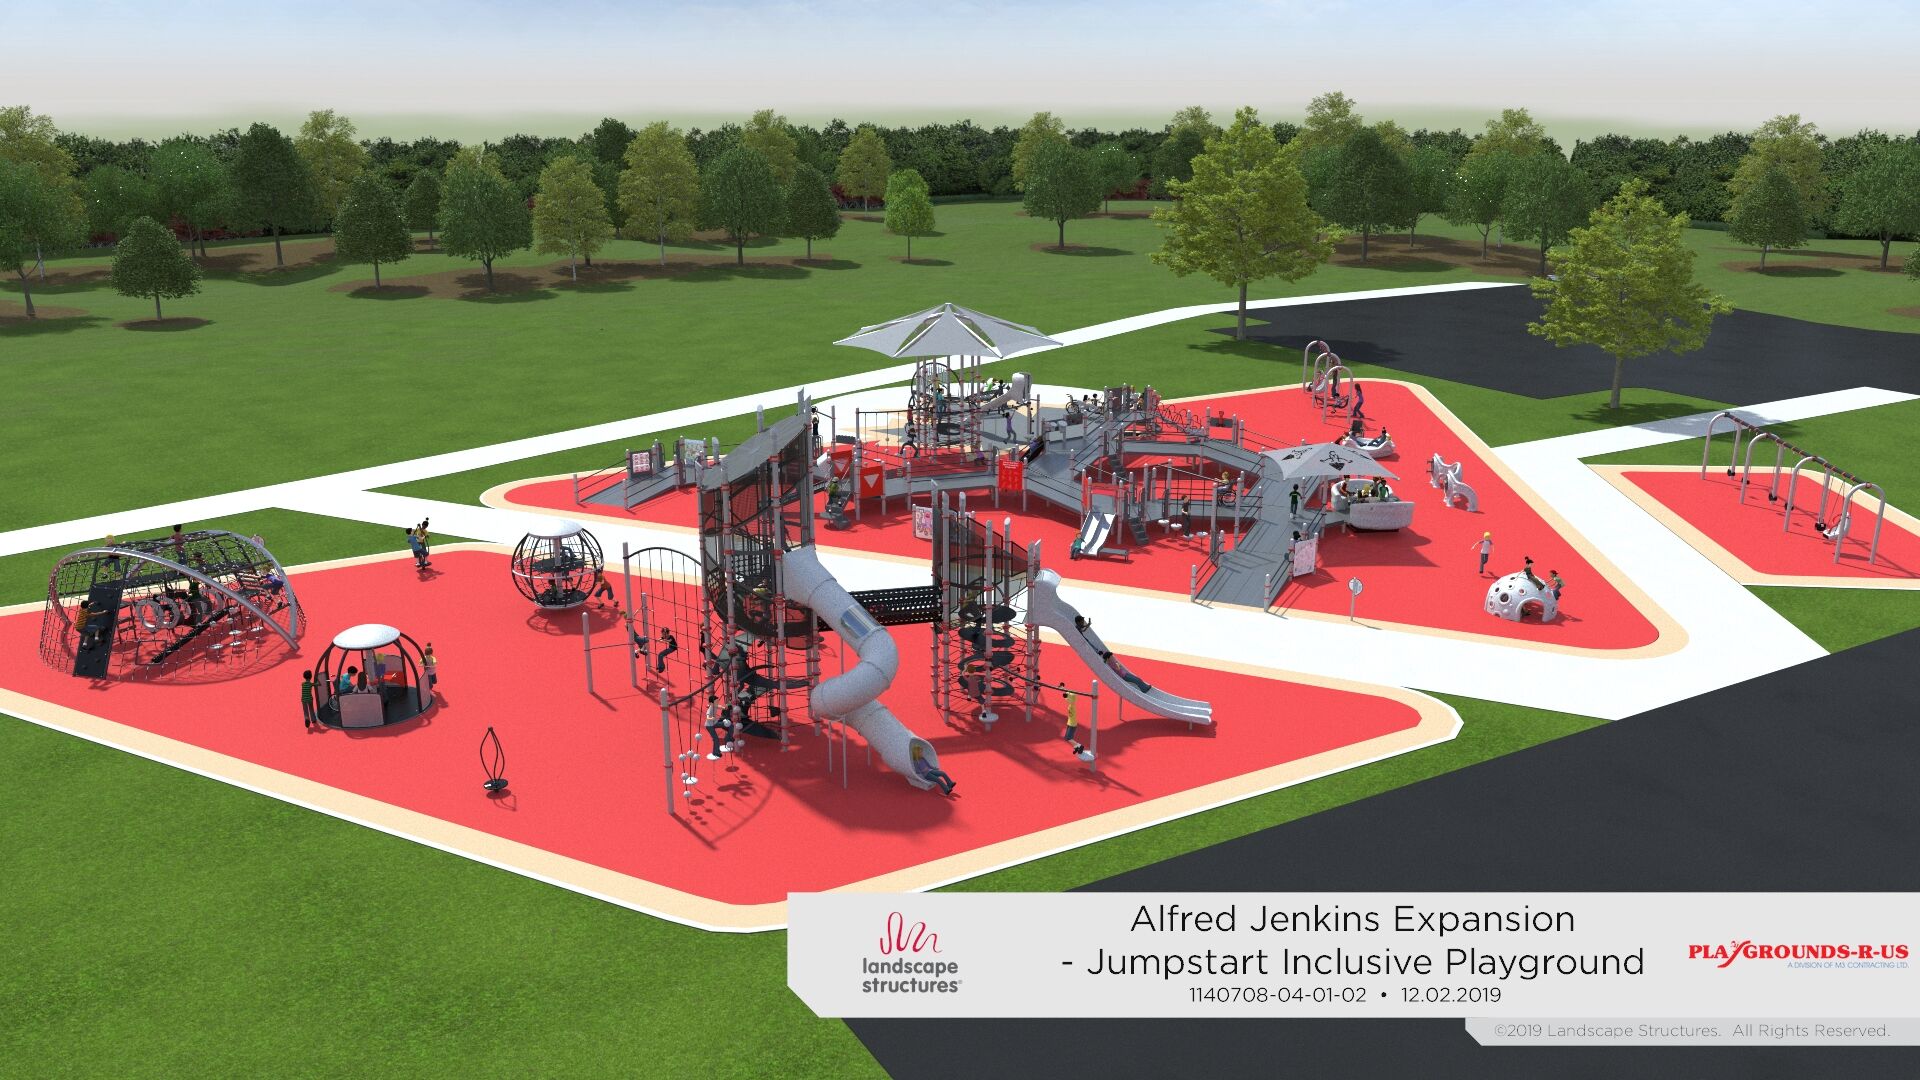 West view of playground expansion